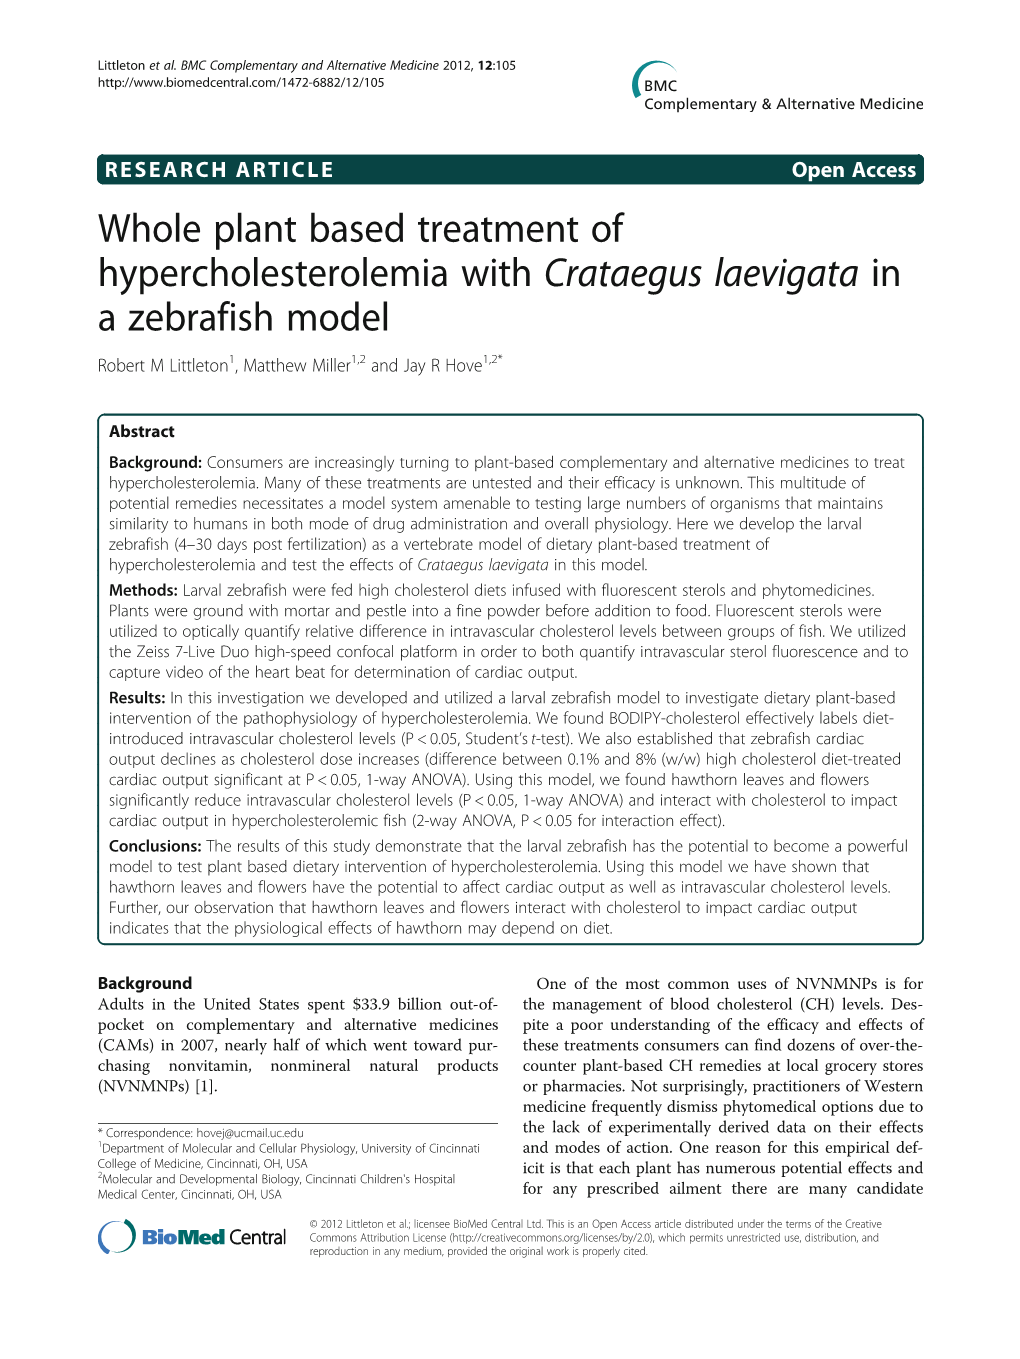 Whole Plant Based Treatment of Hypercholesterolemia with Crataegus Laevigata in a Zebrafish Model Robert M Littleton1, Matthew Miller1,2 and Jay R Hove1,2*